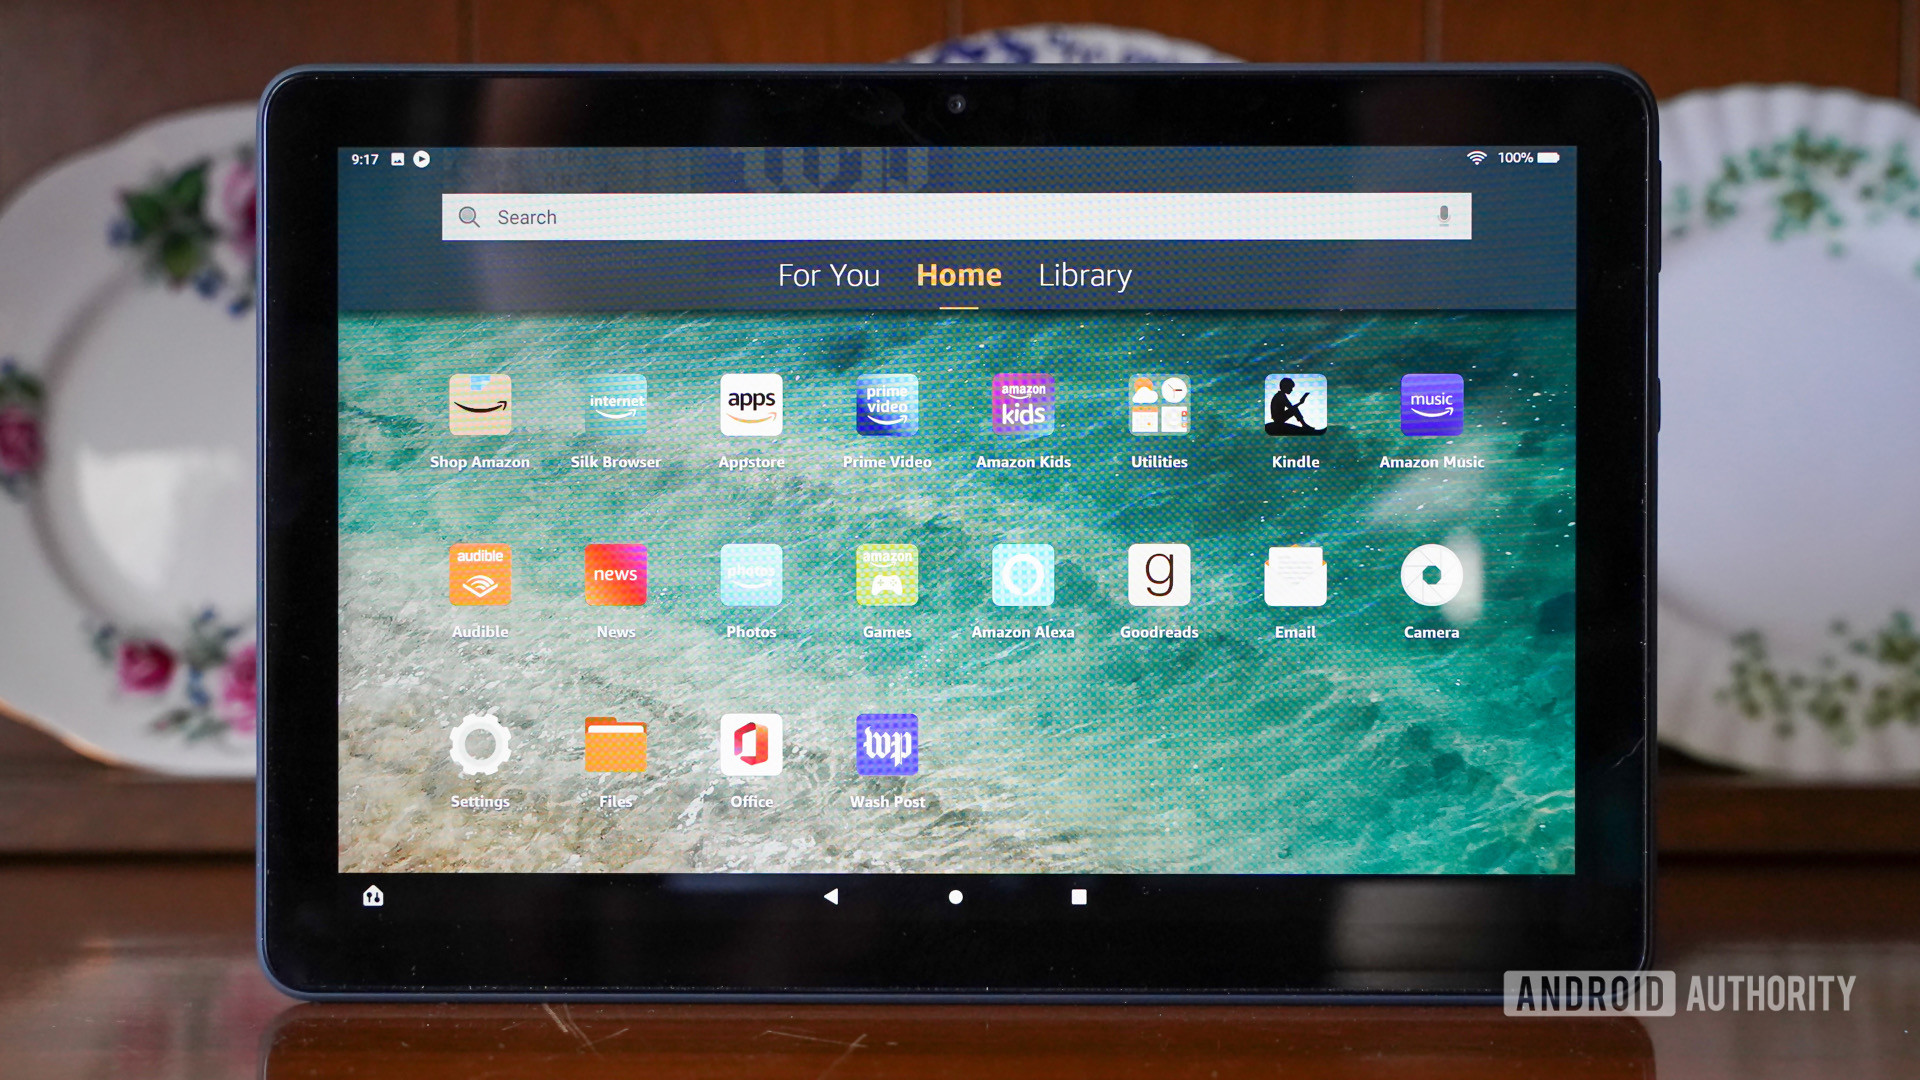 The Amazon Fire HD 10 Plus screen showing apps.